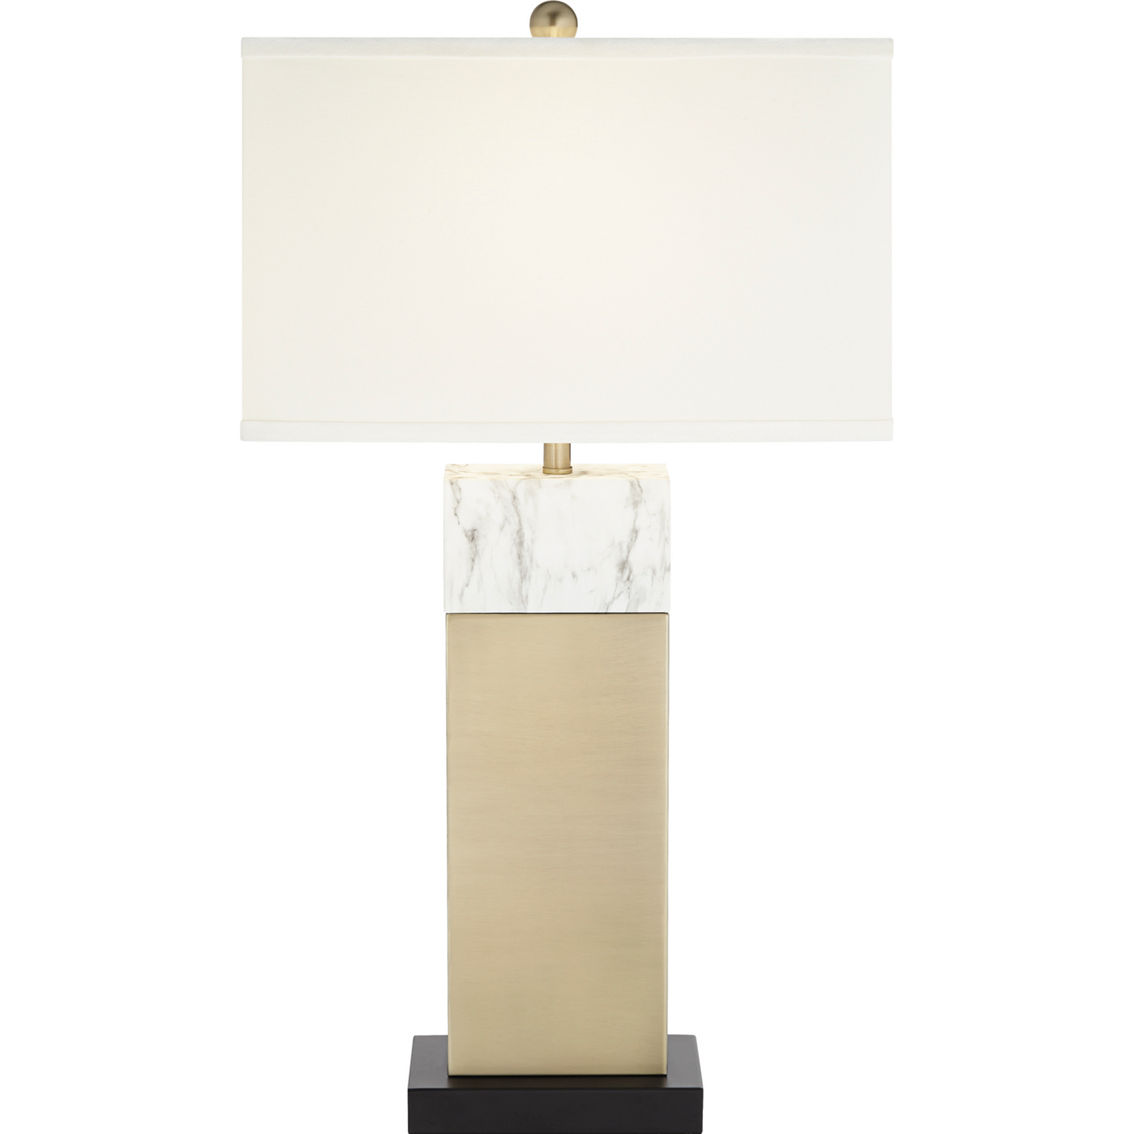 Pacific Coast Parma Faux Marble and Gold Finish Table Lamp - Image 4 of 8